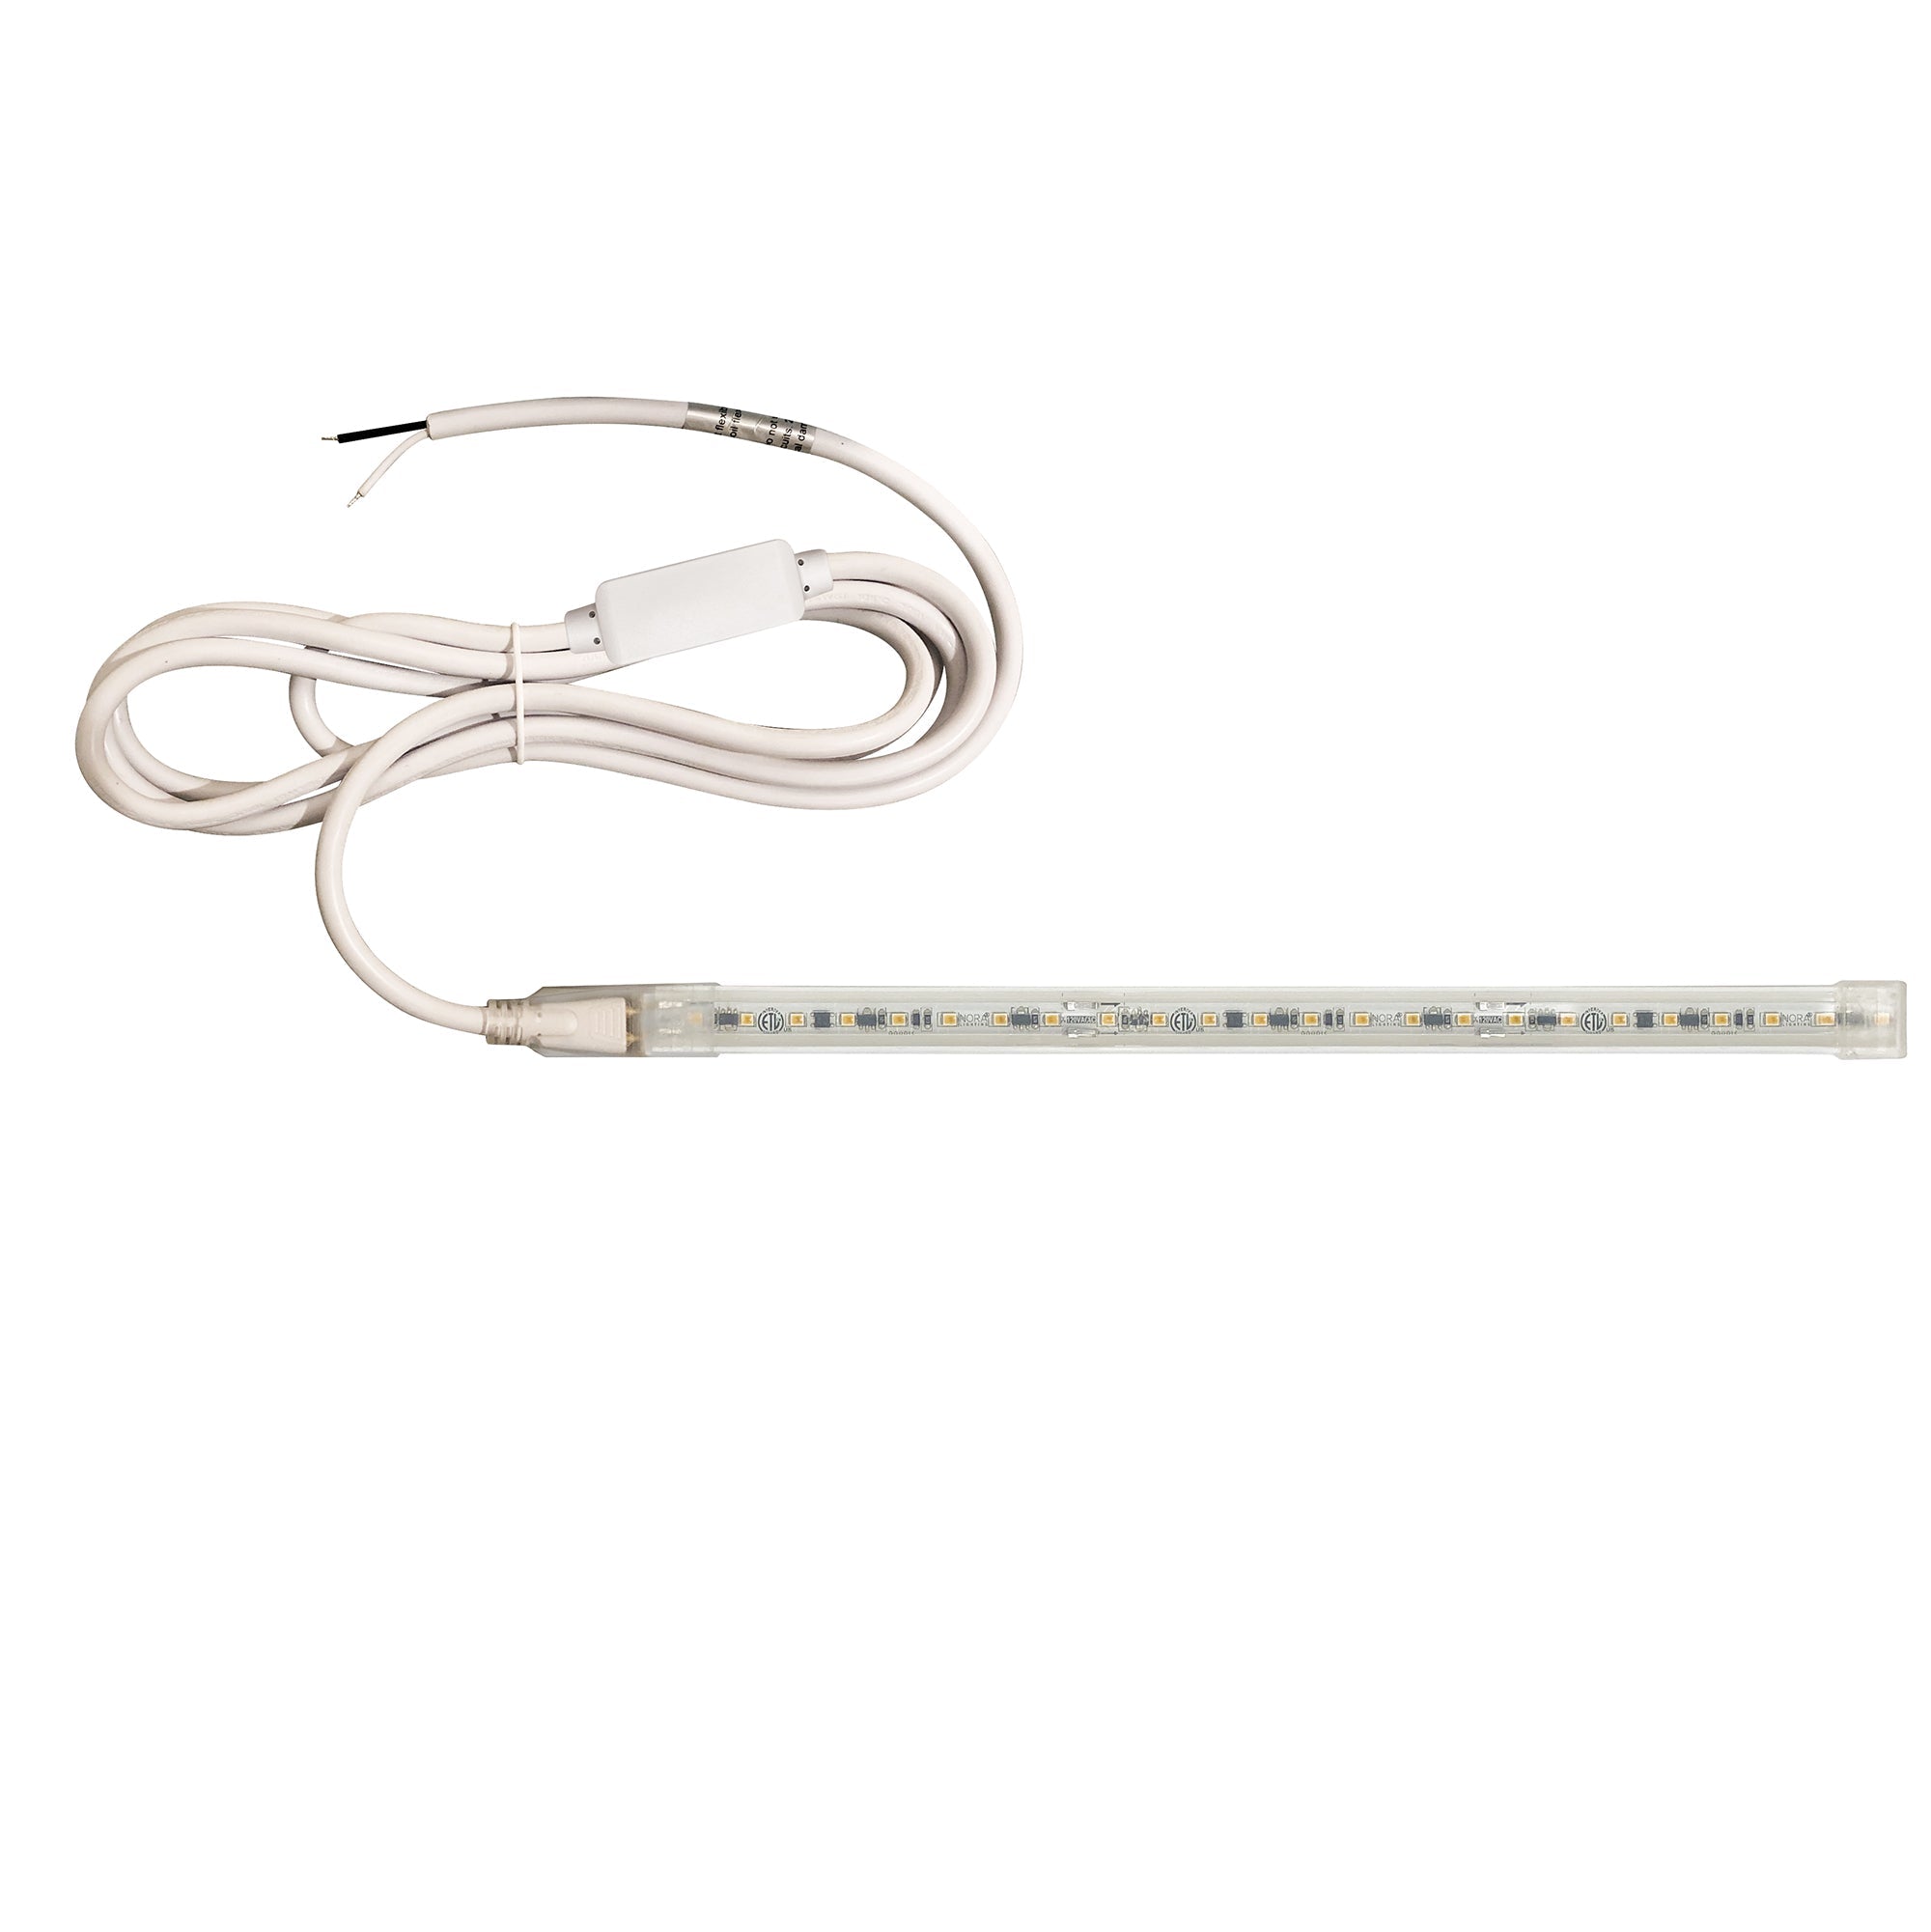 Nora Lighting NUTP13-W42-8-12-930/HWSP - Accent / Undercabinet - Custom Cut 42-ft, 8-in 120V Continuous LED Tape Light, 330lm / 3.6W per foot, 3000K, w/ Mounting Clips and 8' Hardwired Power Cord w/ Surge Protector